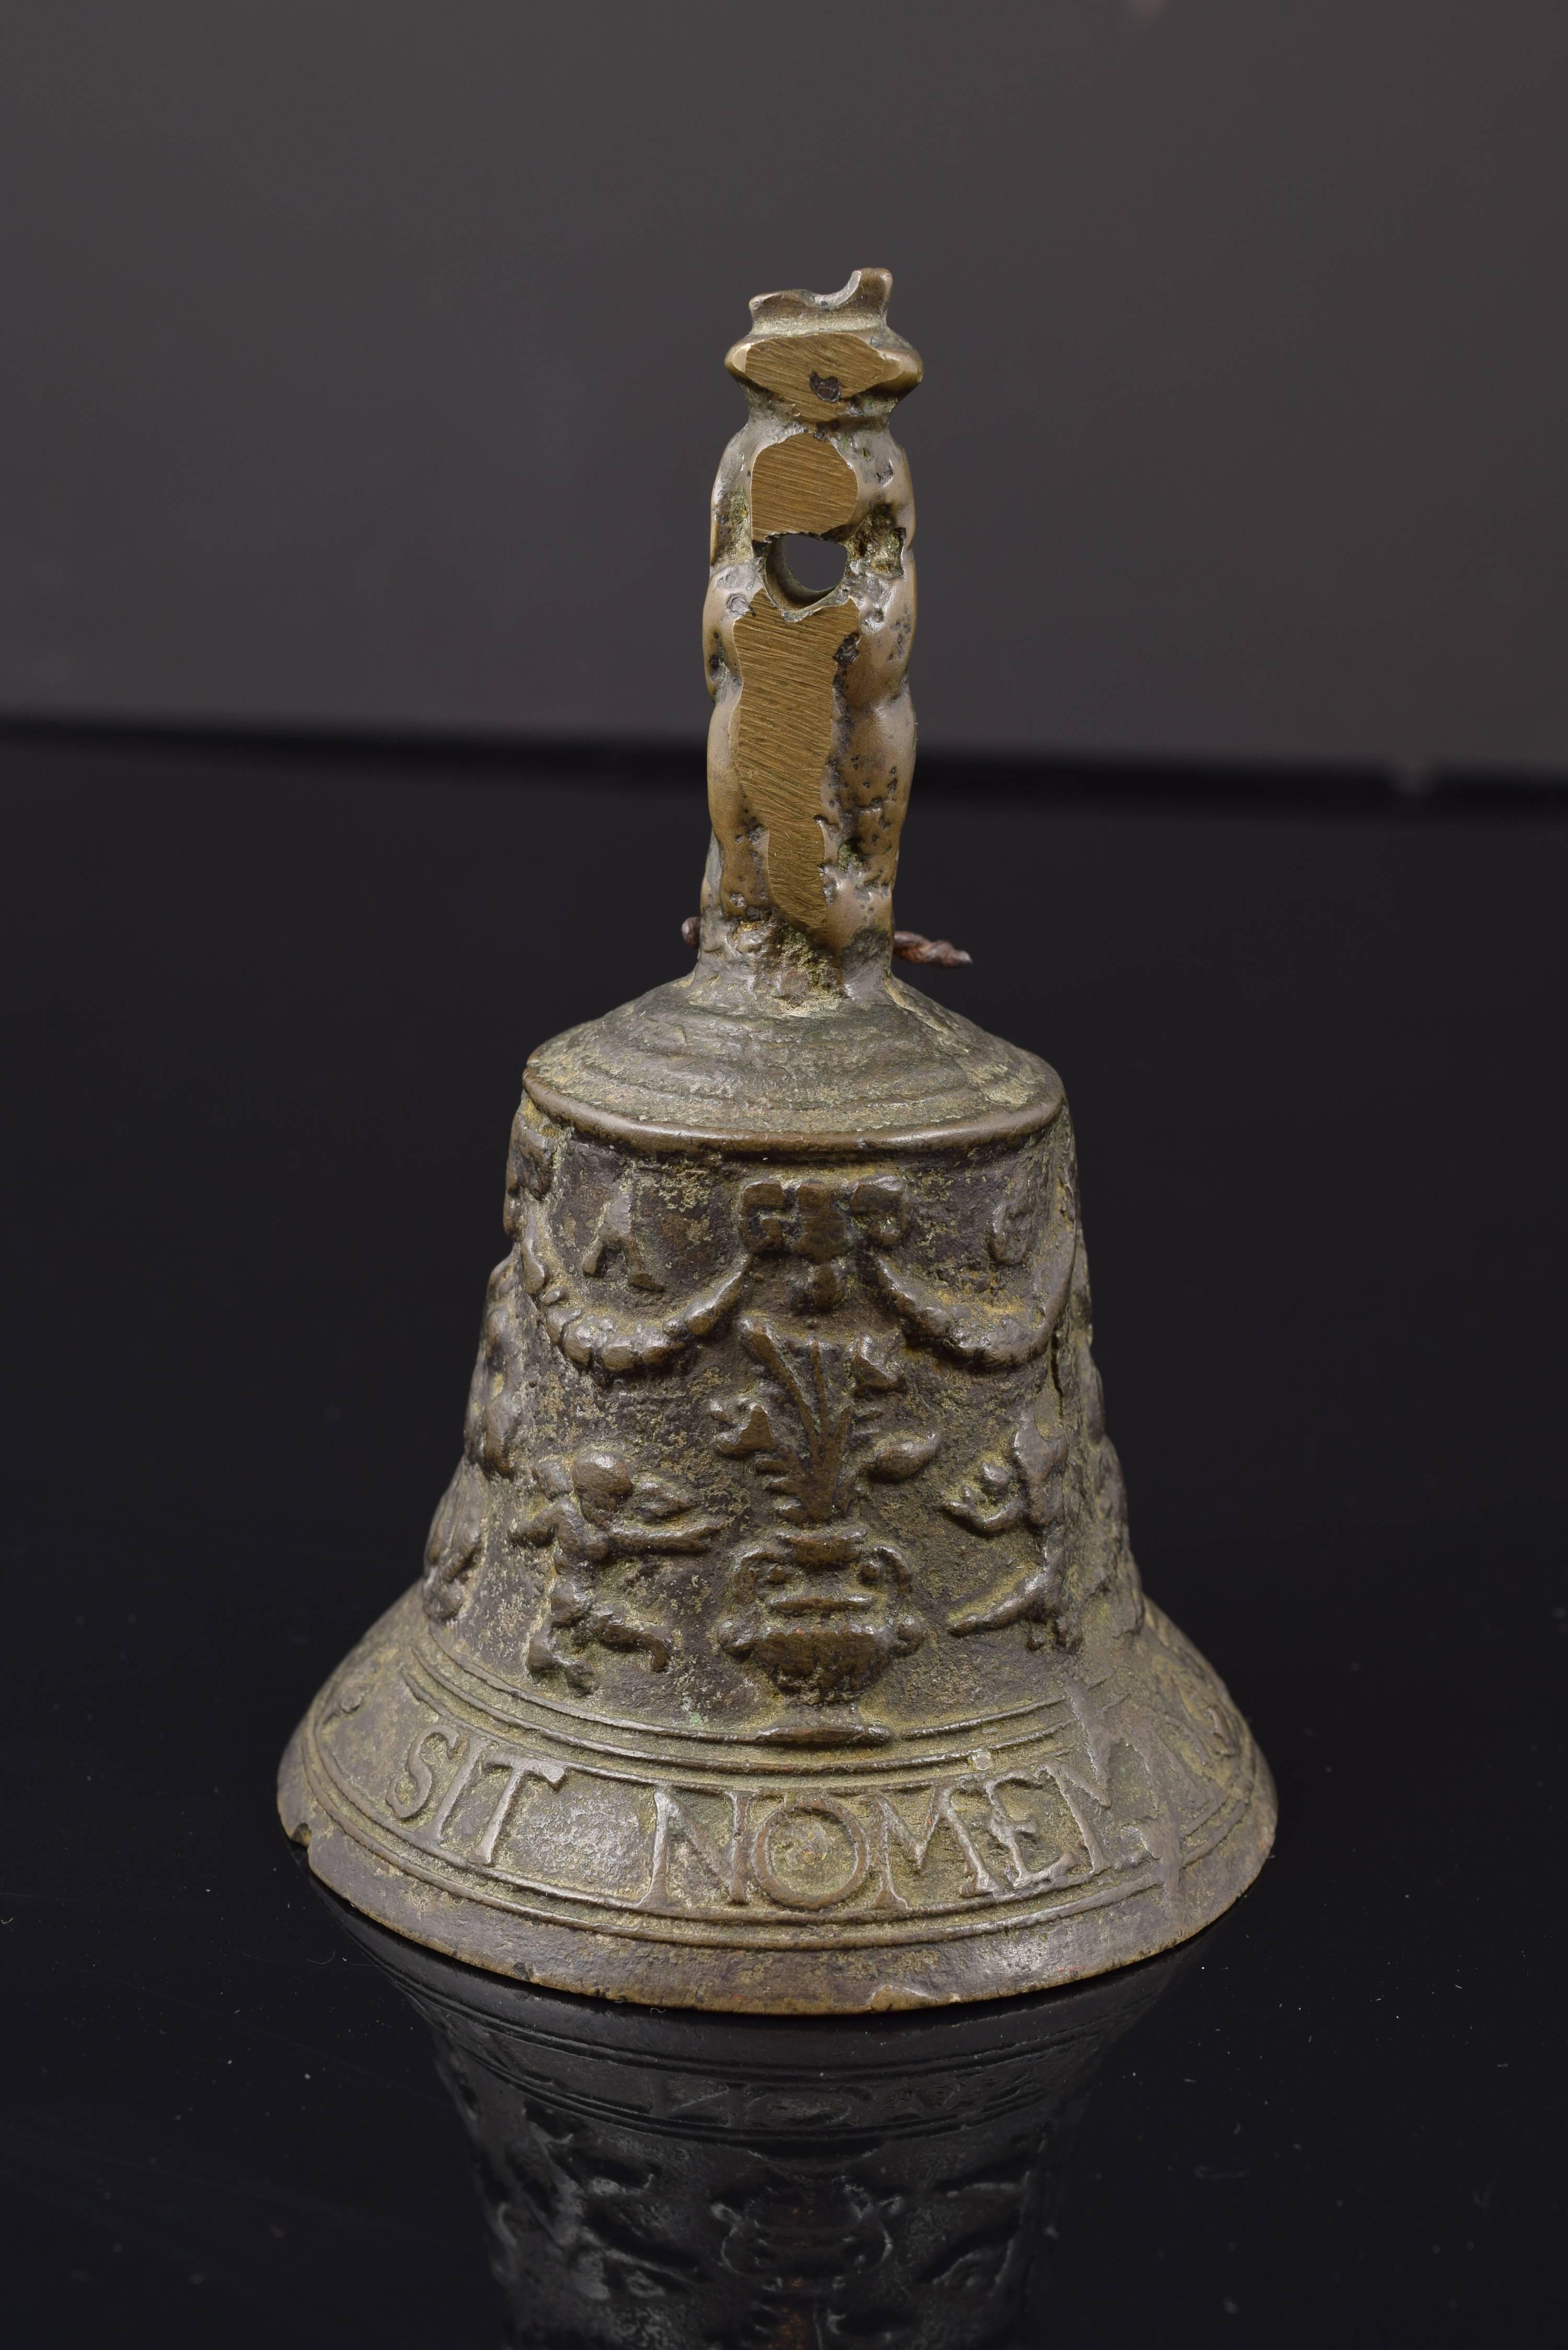 Bronze bell with religious legend in Latin in the foot and scenes in the middle. Because of its use, is difficult to distinguish the decorative elements: kids, vases, wreaths and bucráneos (typical of the Renaissance), an angel (which may be part of